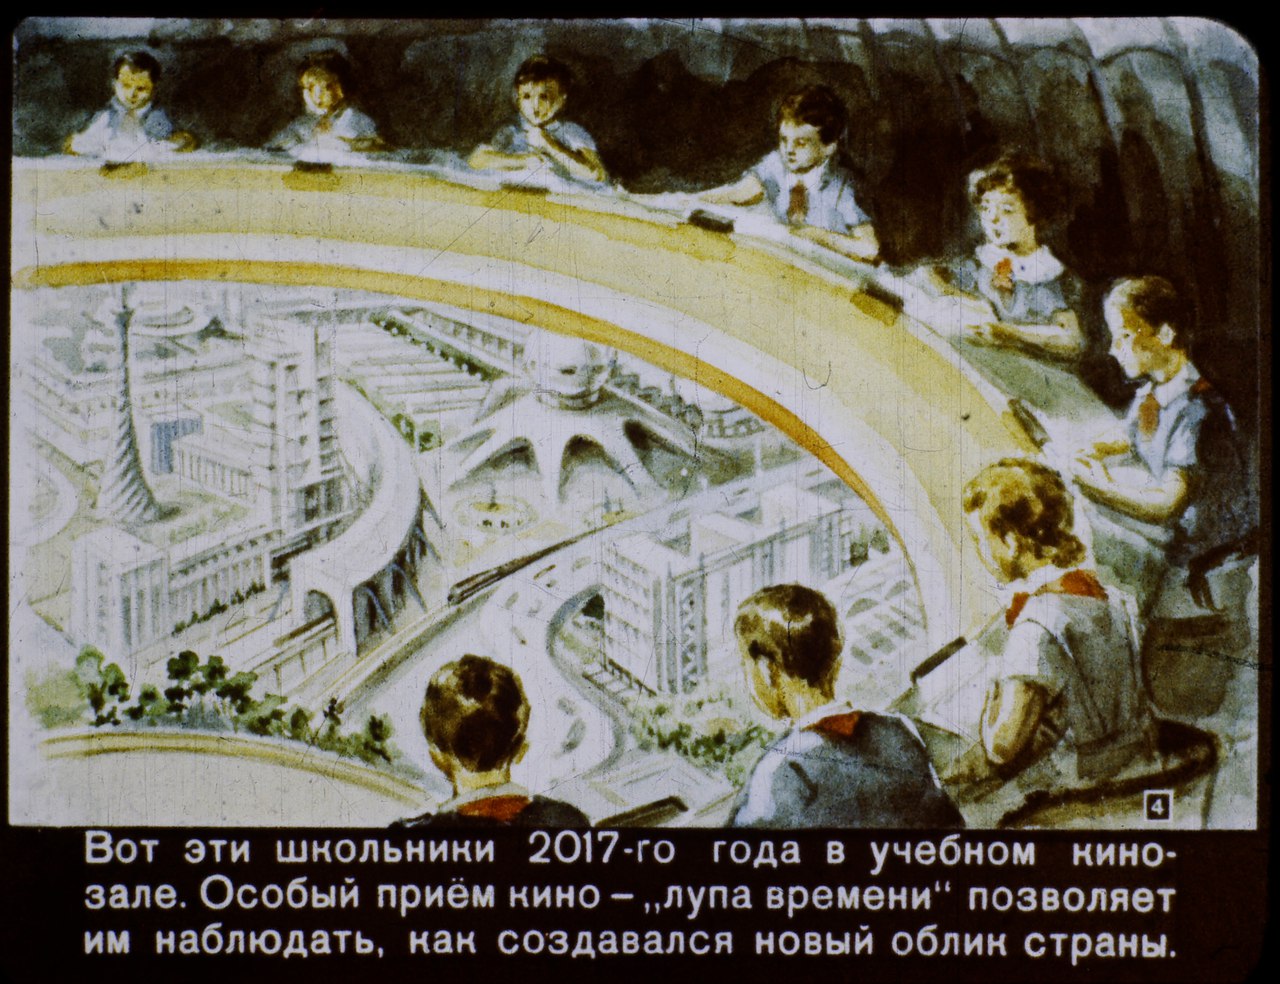 How Russians Imagined The Year 2017 In 1960